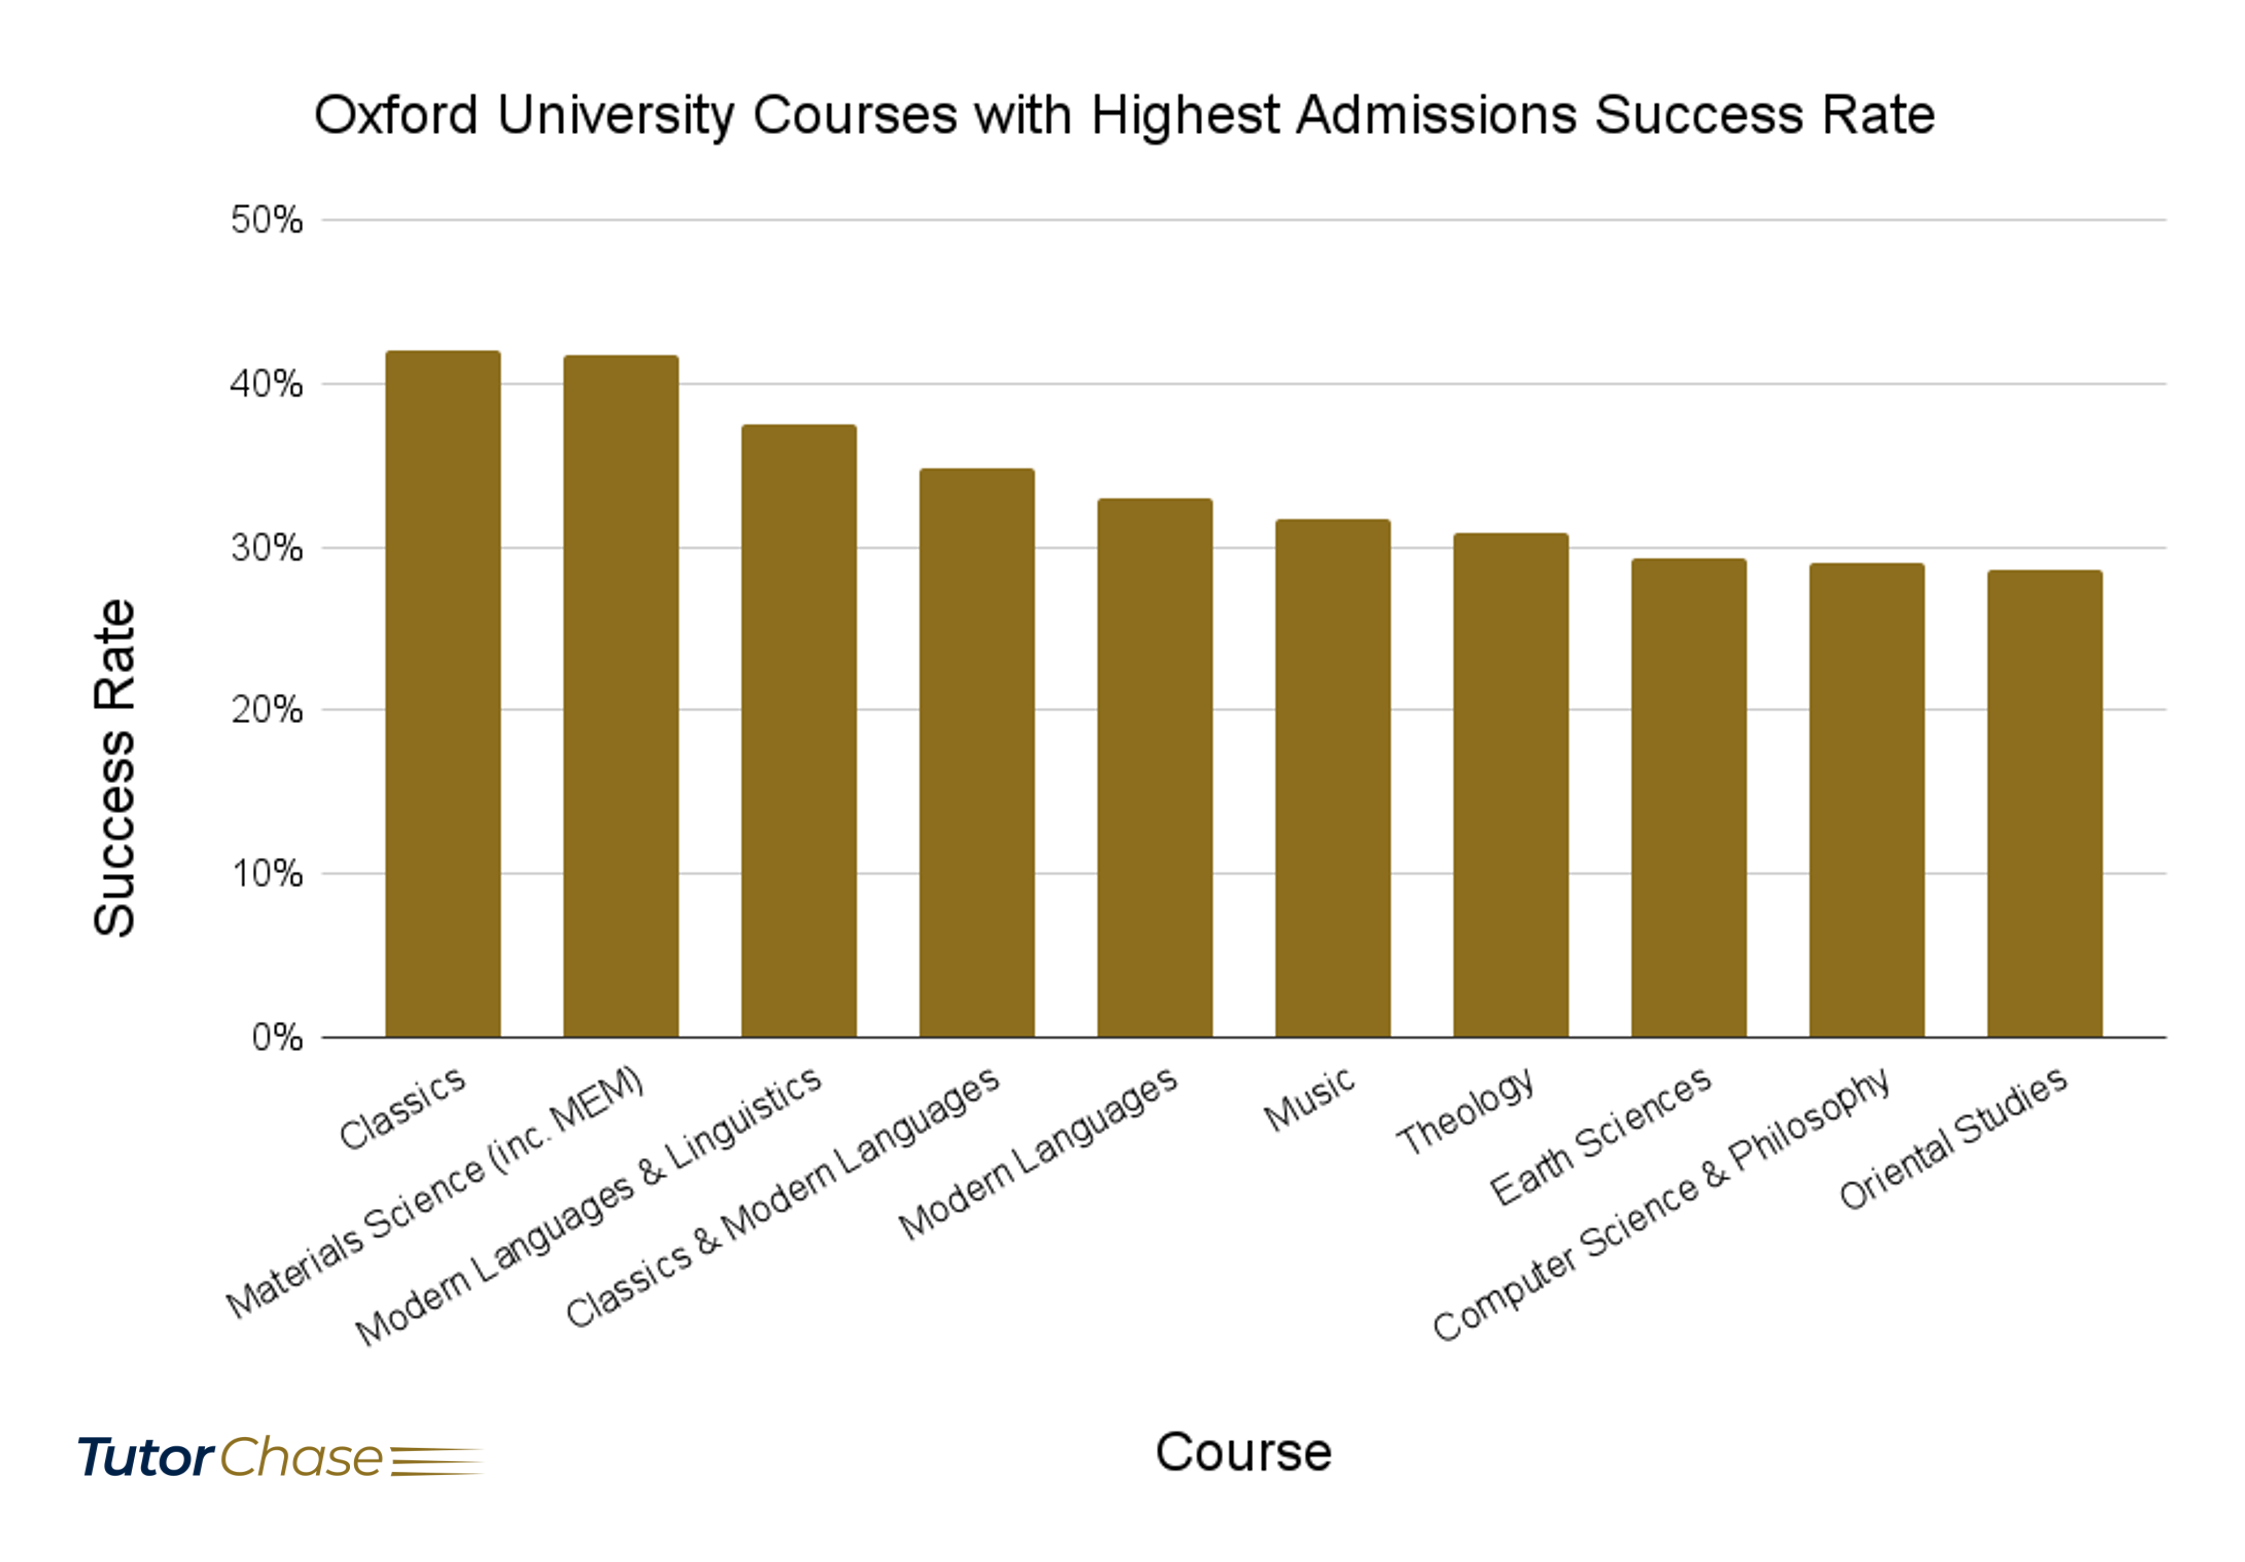 Oxford University Courses with Highest Admissions Success Rates